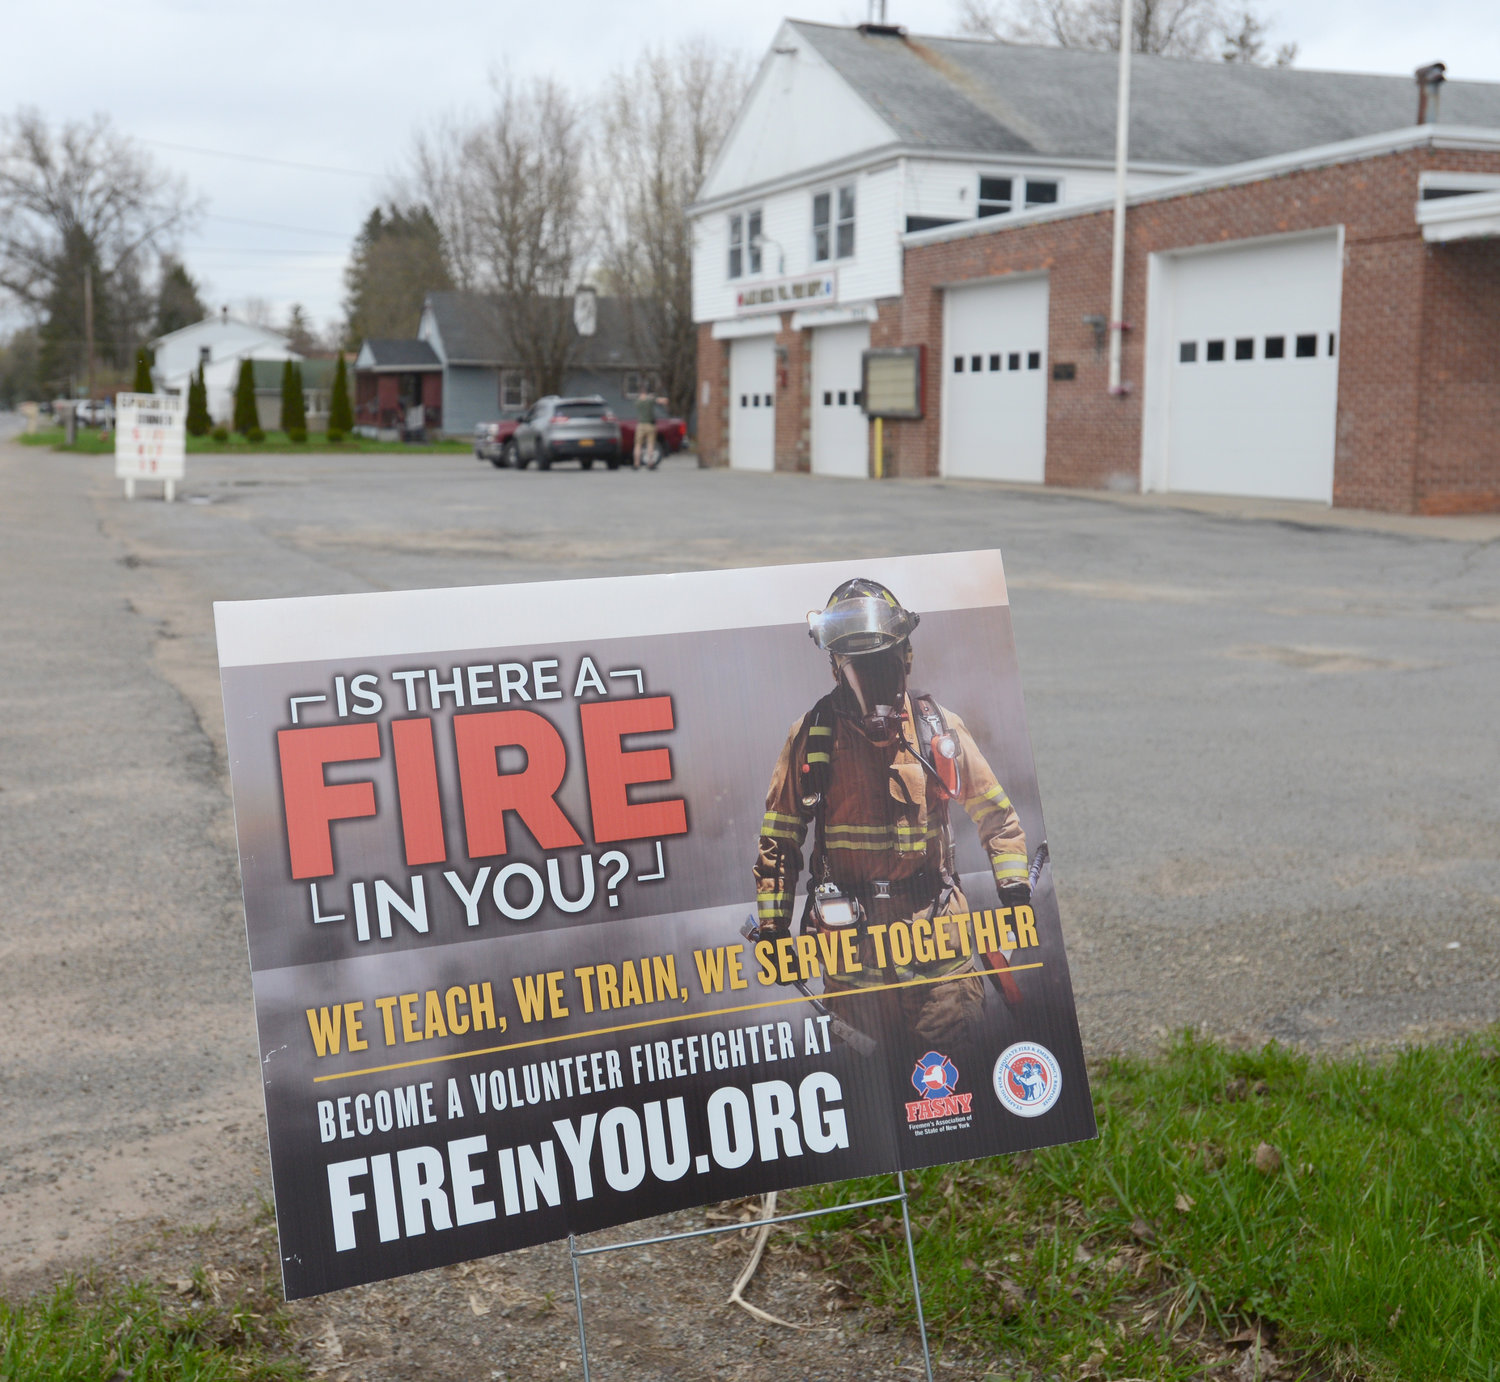 RECRUITNY — A sign in front of the Lake Delta firehouse on Elmer Hill Road seeks to entice new volunteers. Lake Delta is one of nearly two dozen fire departments across the county holding an open house this weekend as part of the RecruitNY effort.